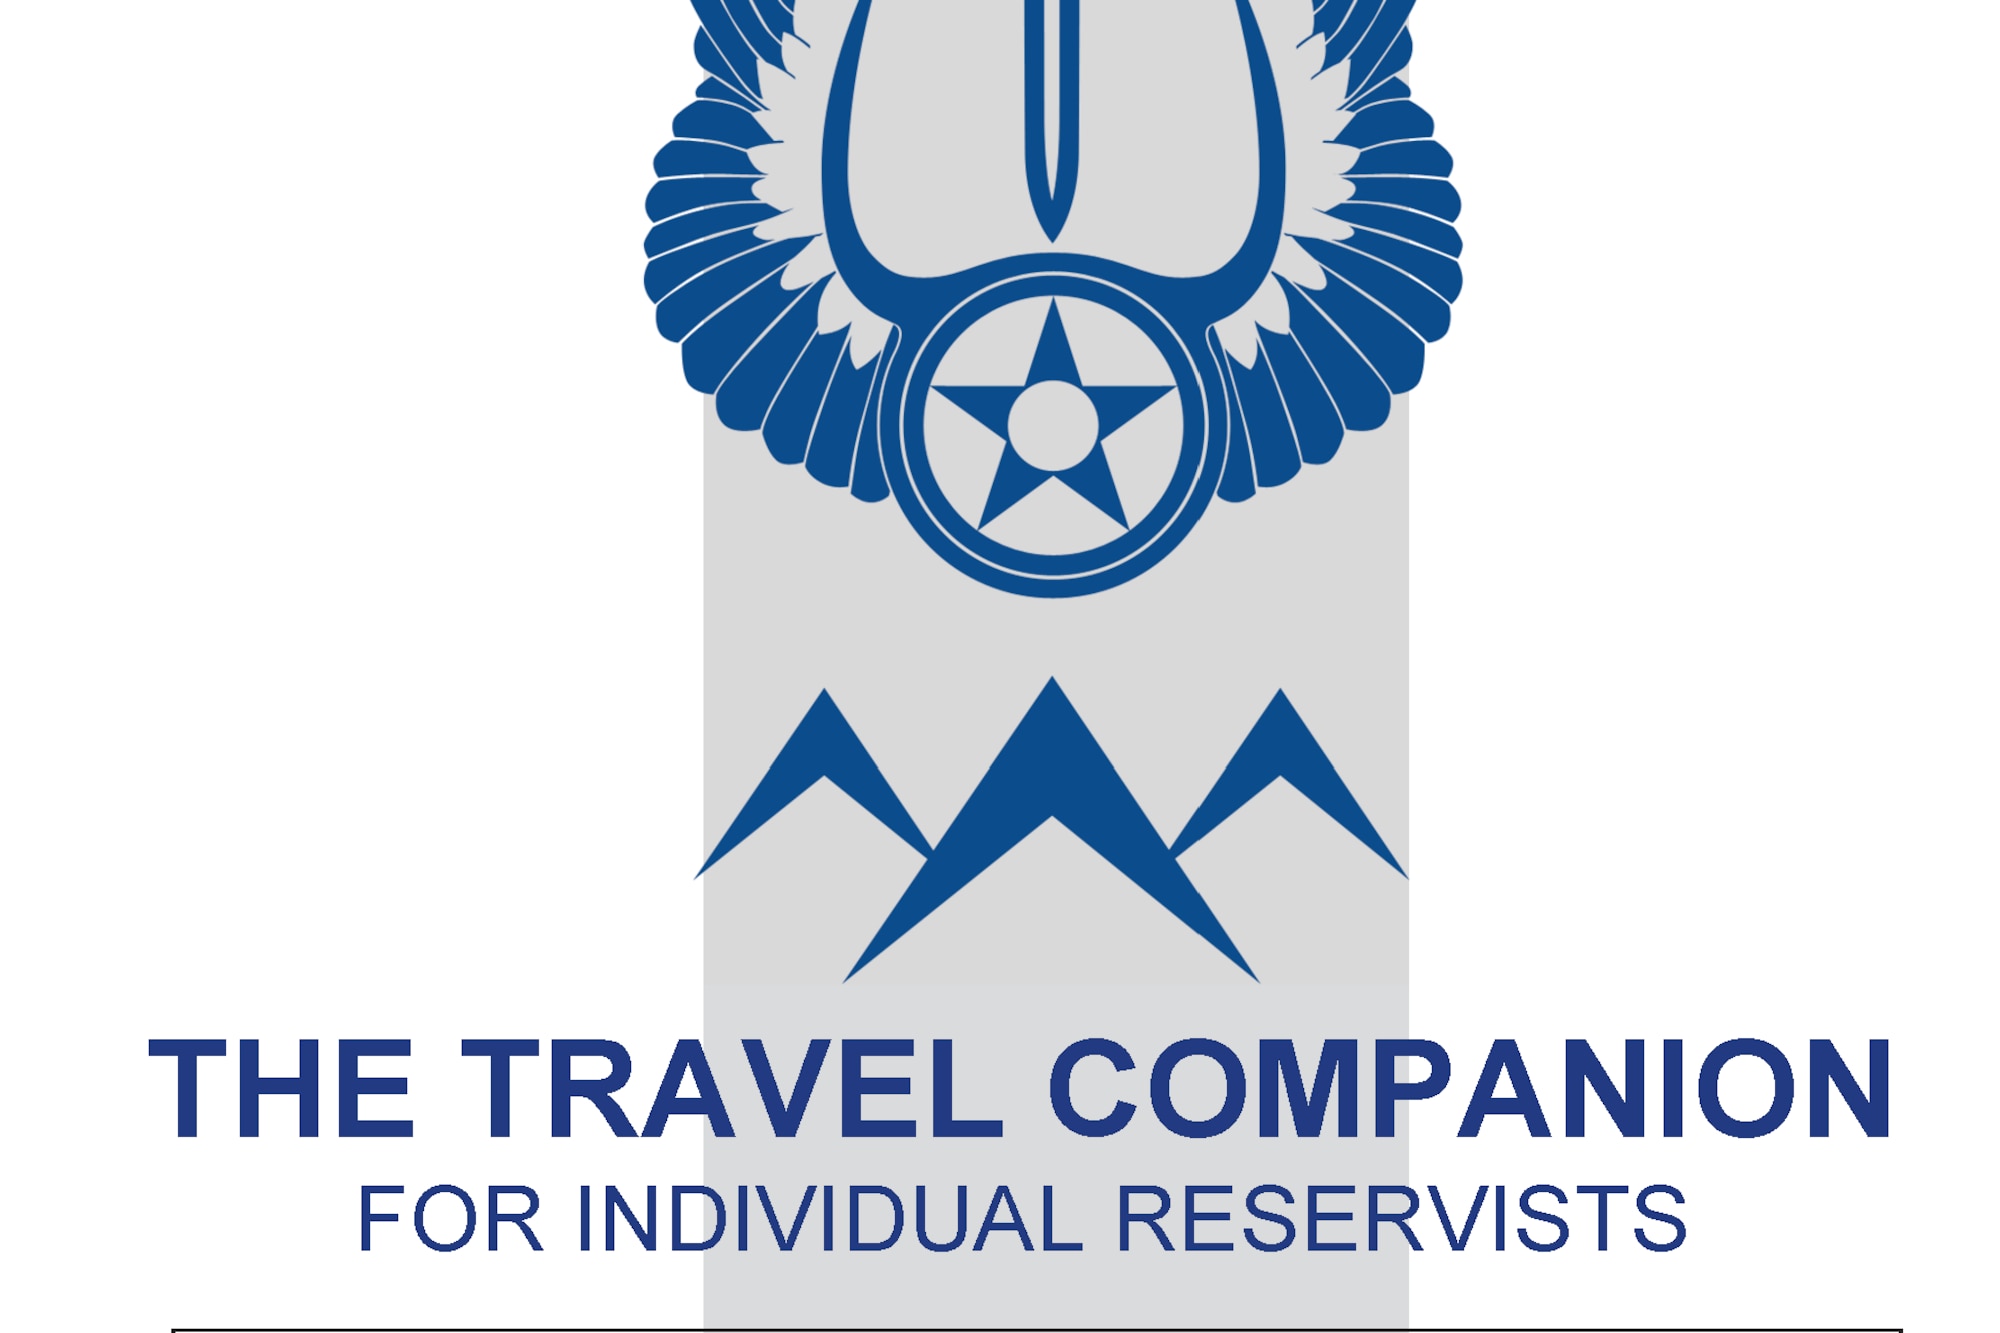 The Travel Companion for Individual Reservists